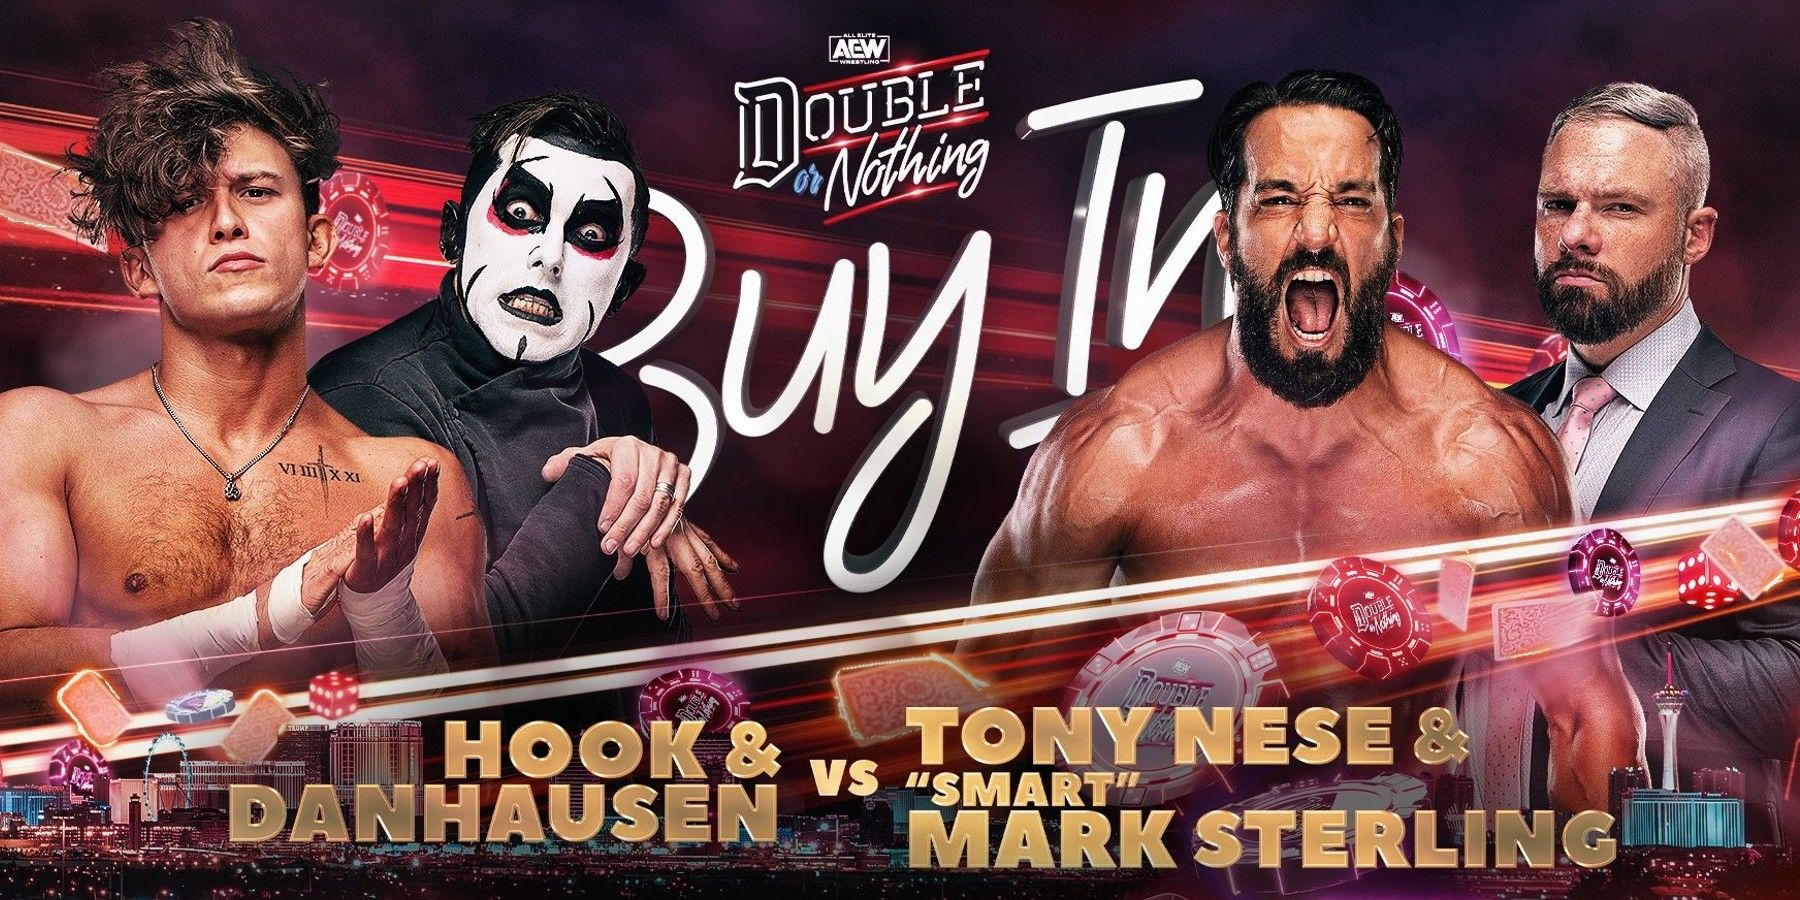 HOOK, Danhausen, Tony Nese, and Smart Mark Sterling Double or Nothing 2022 graphic